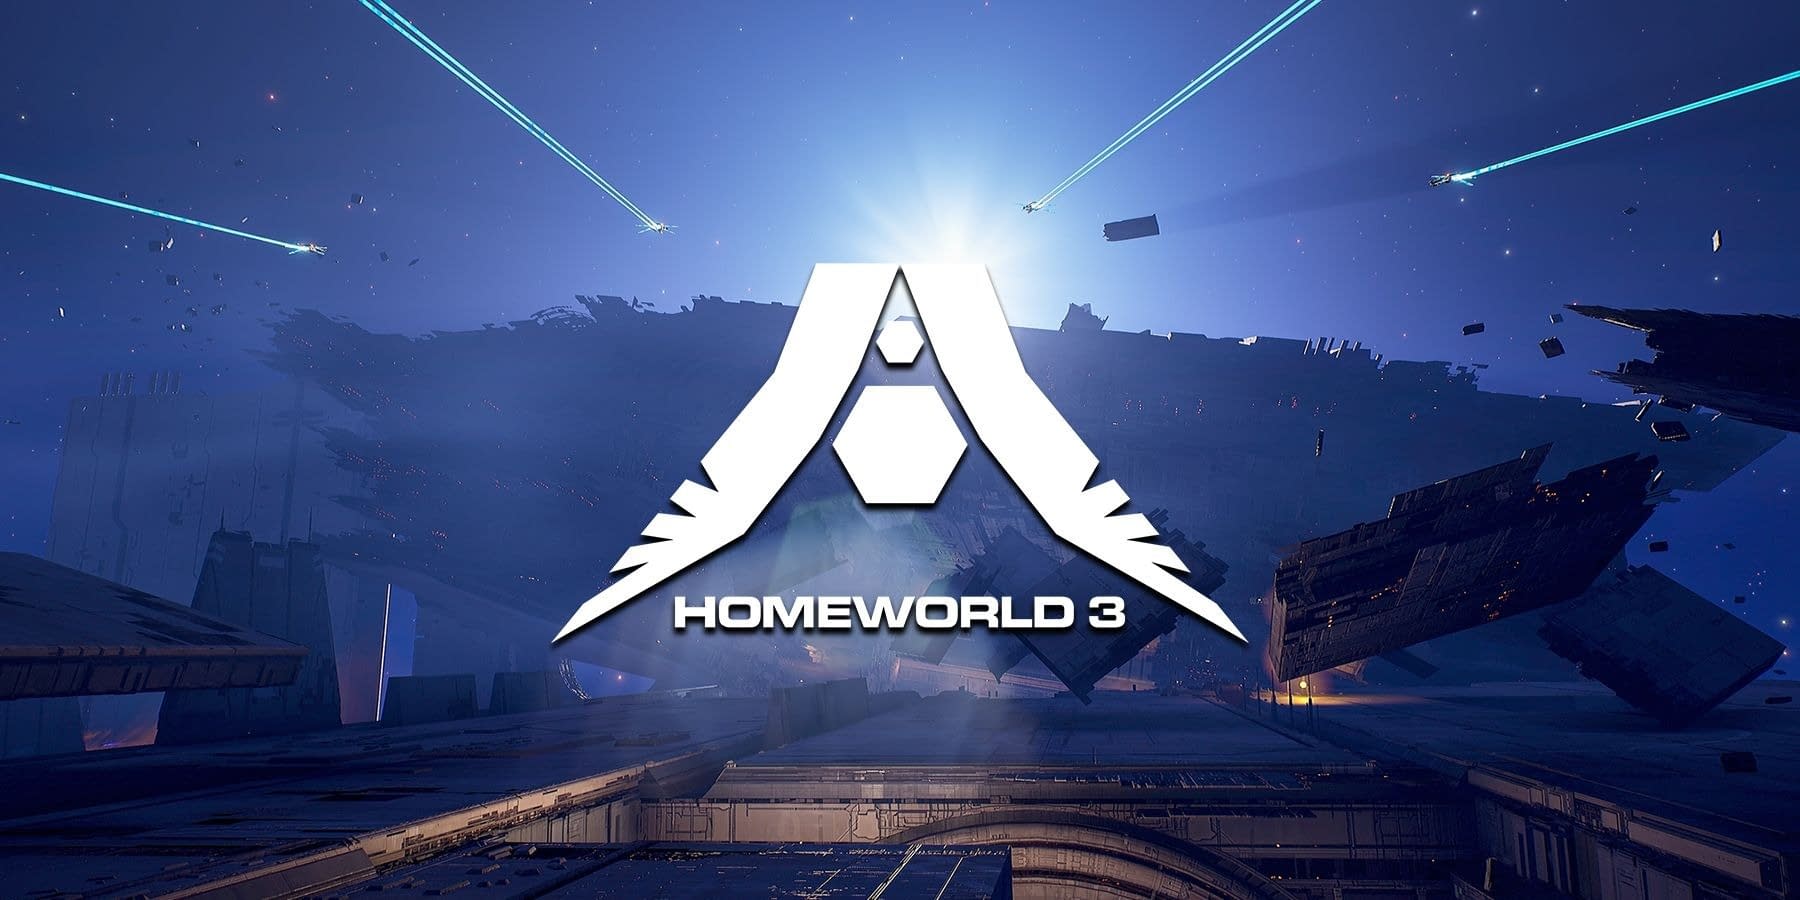 Space-themed strategy game Homeworld 3 has been postponed again!